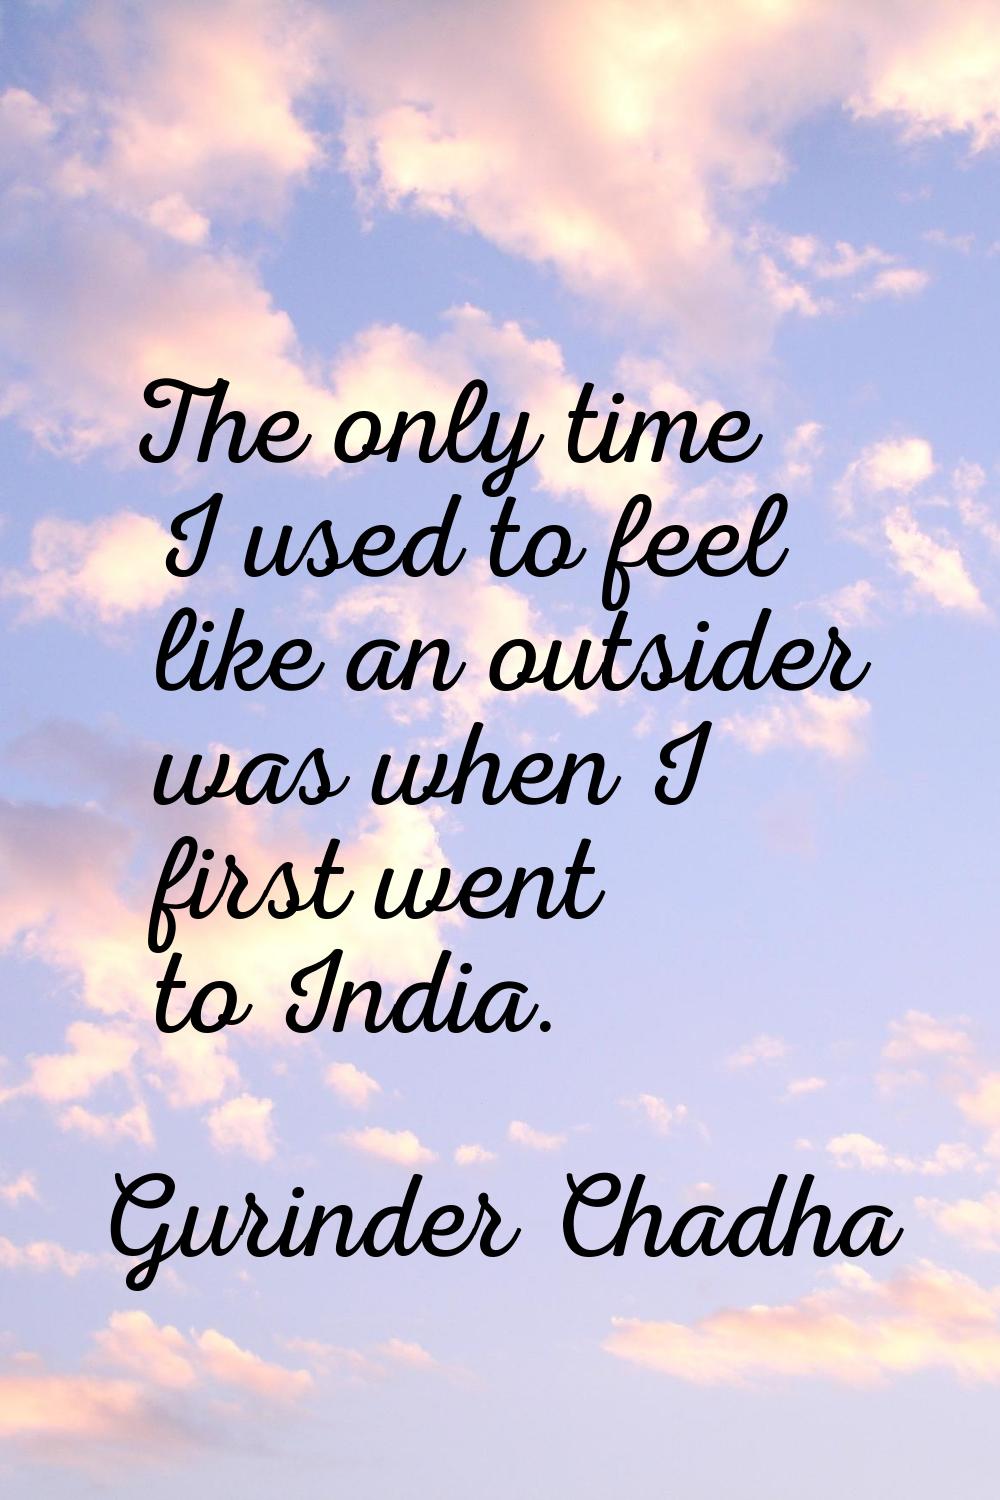 The only time I used to feel like an outsider was when I first went to India.